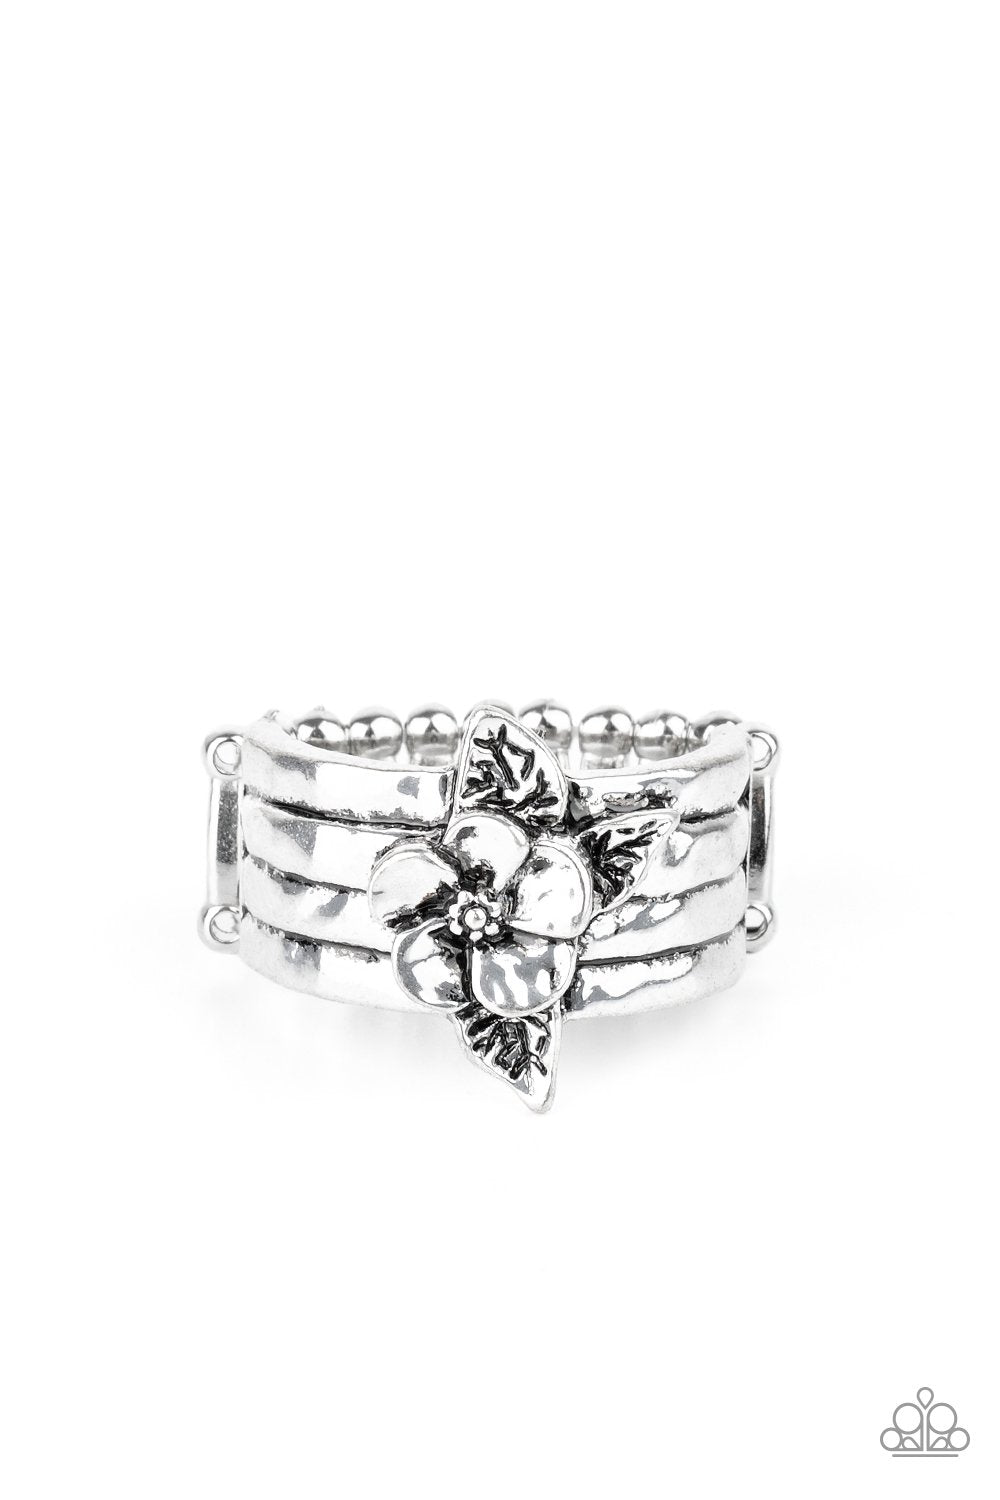 Island Icon Silver Flower Ring - Paparazzi Accessories- lightbox - CarasShop.com - $5 Jewelry by Cara Jewels